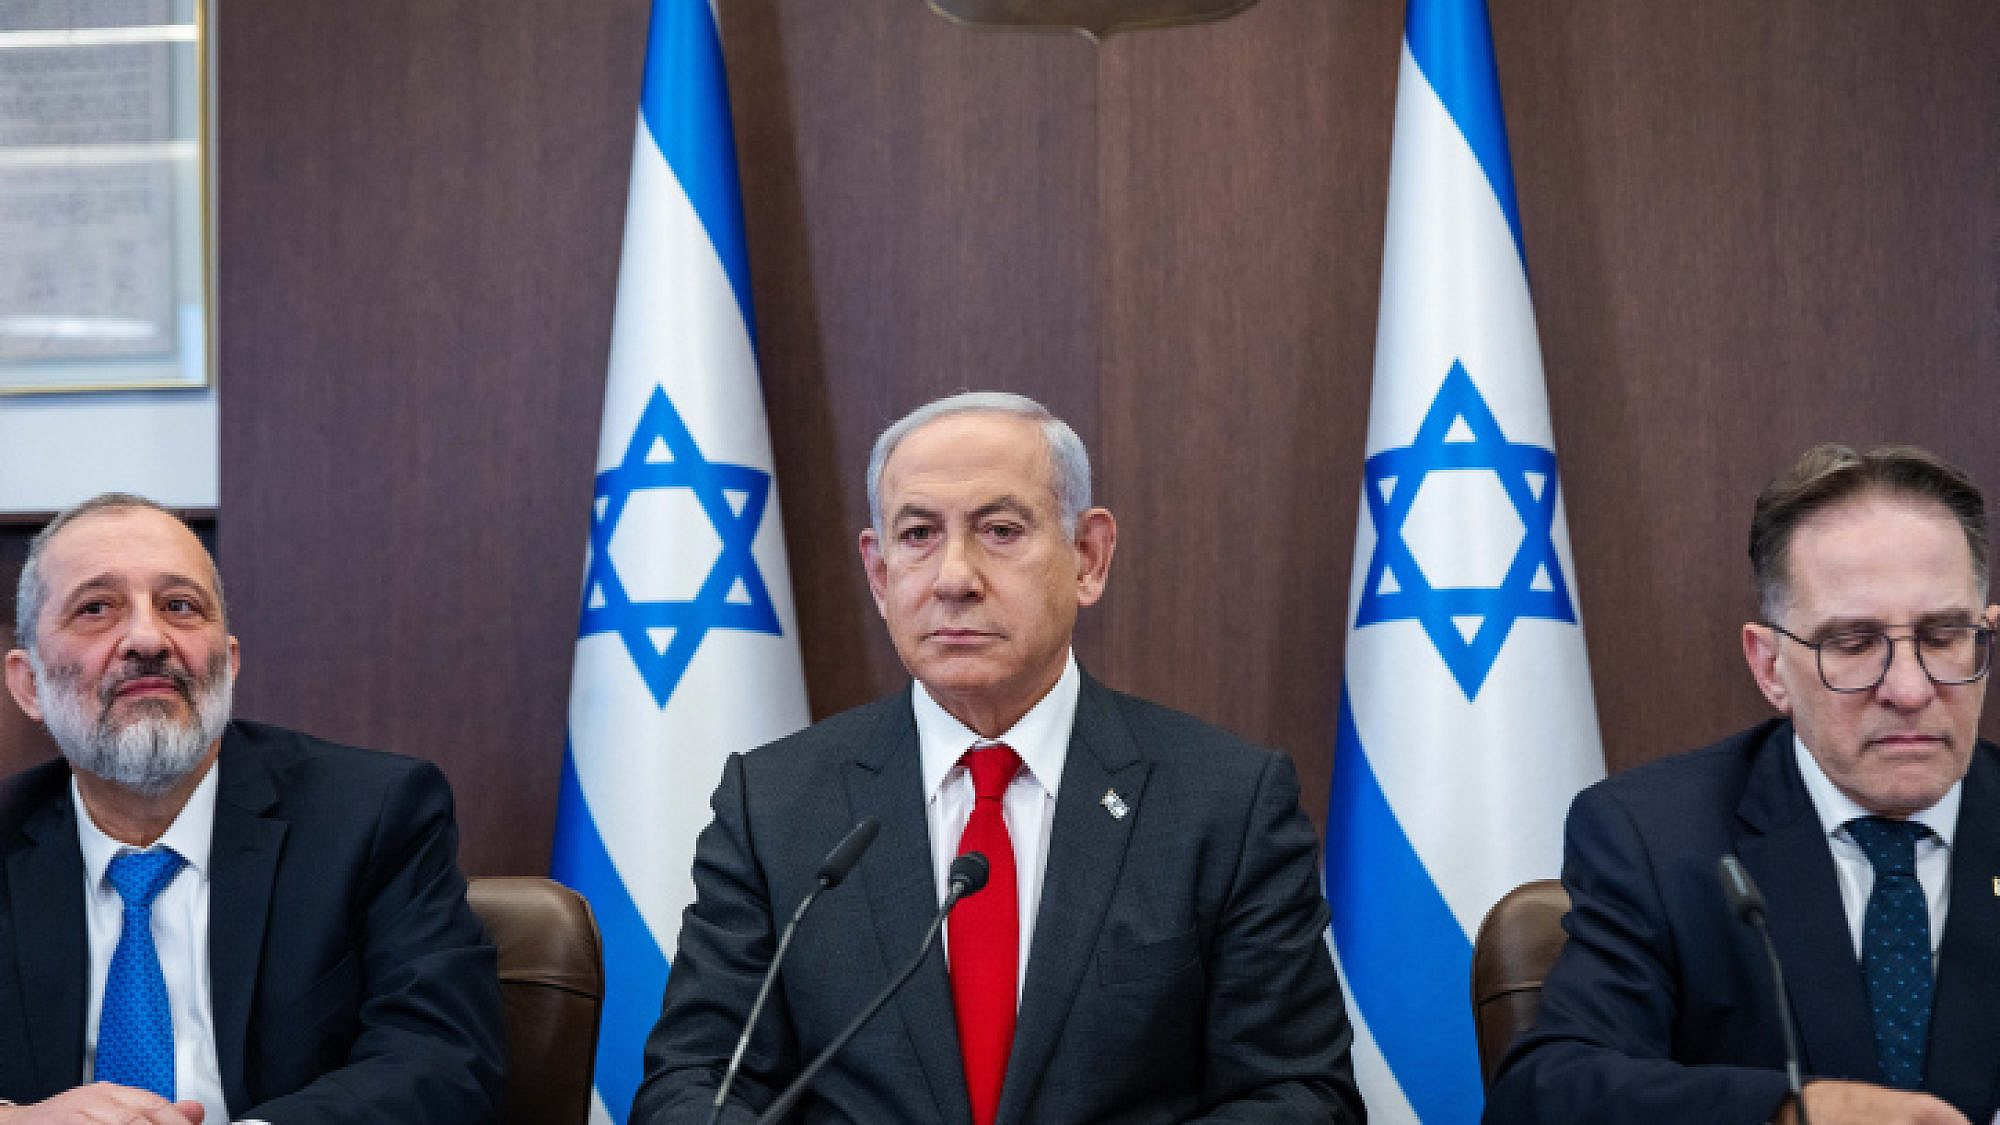 Israeli Prime Minister Benjamin Netanyahu leads a meeting at his office in Jerusalem, Jan. 8, 2023. Photo by Olivier Fitoussi/Flash90.